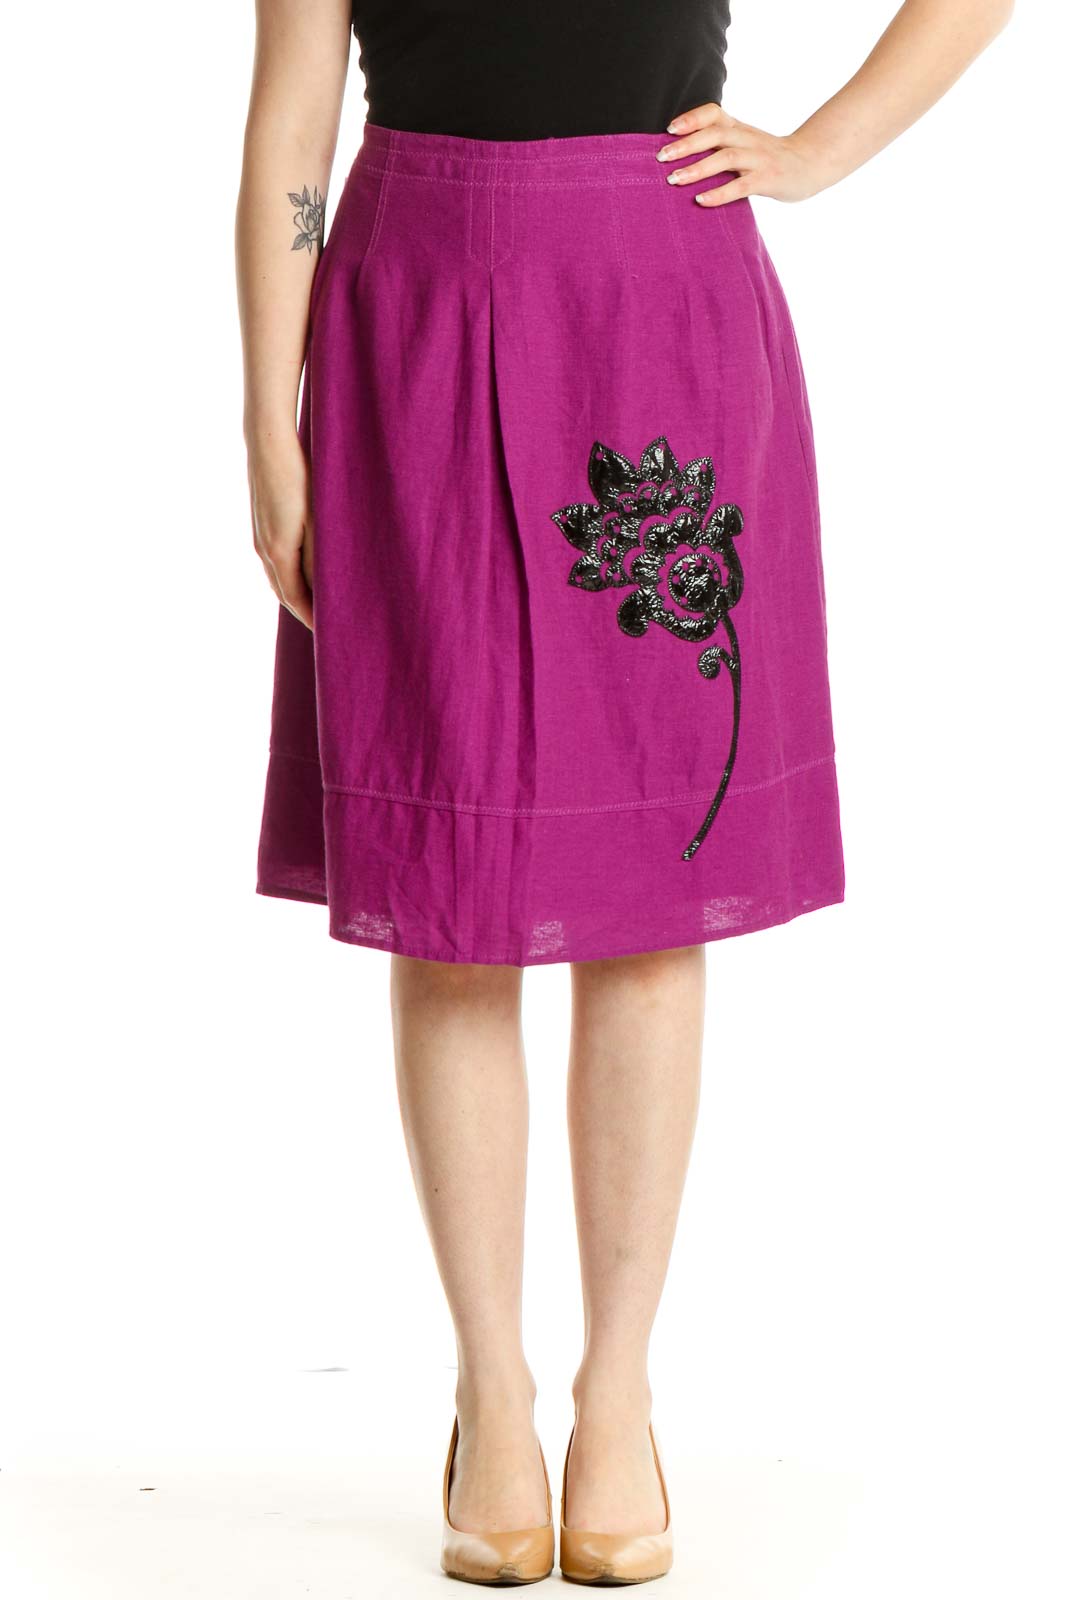 Pink Graphic Print Chic A-Line Skirt Front